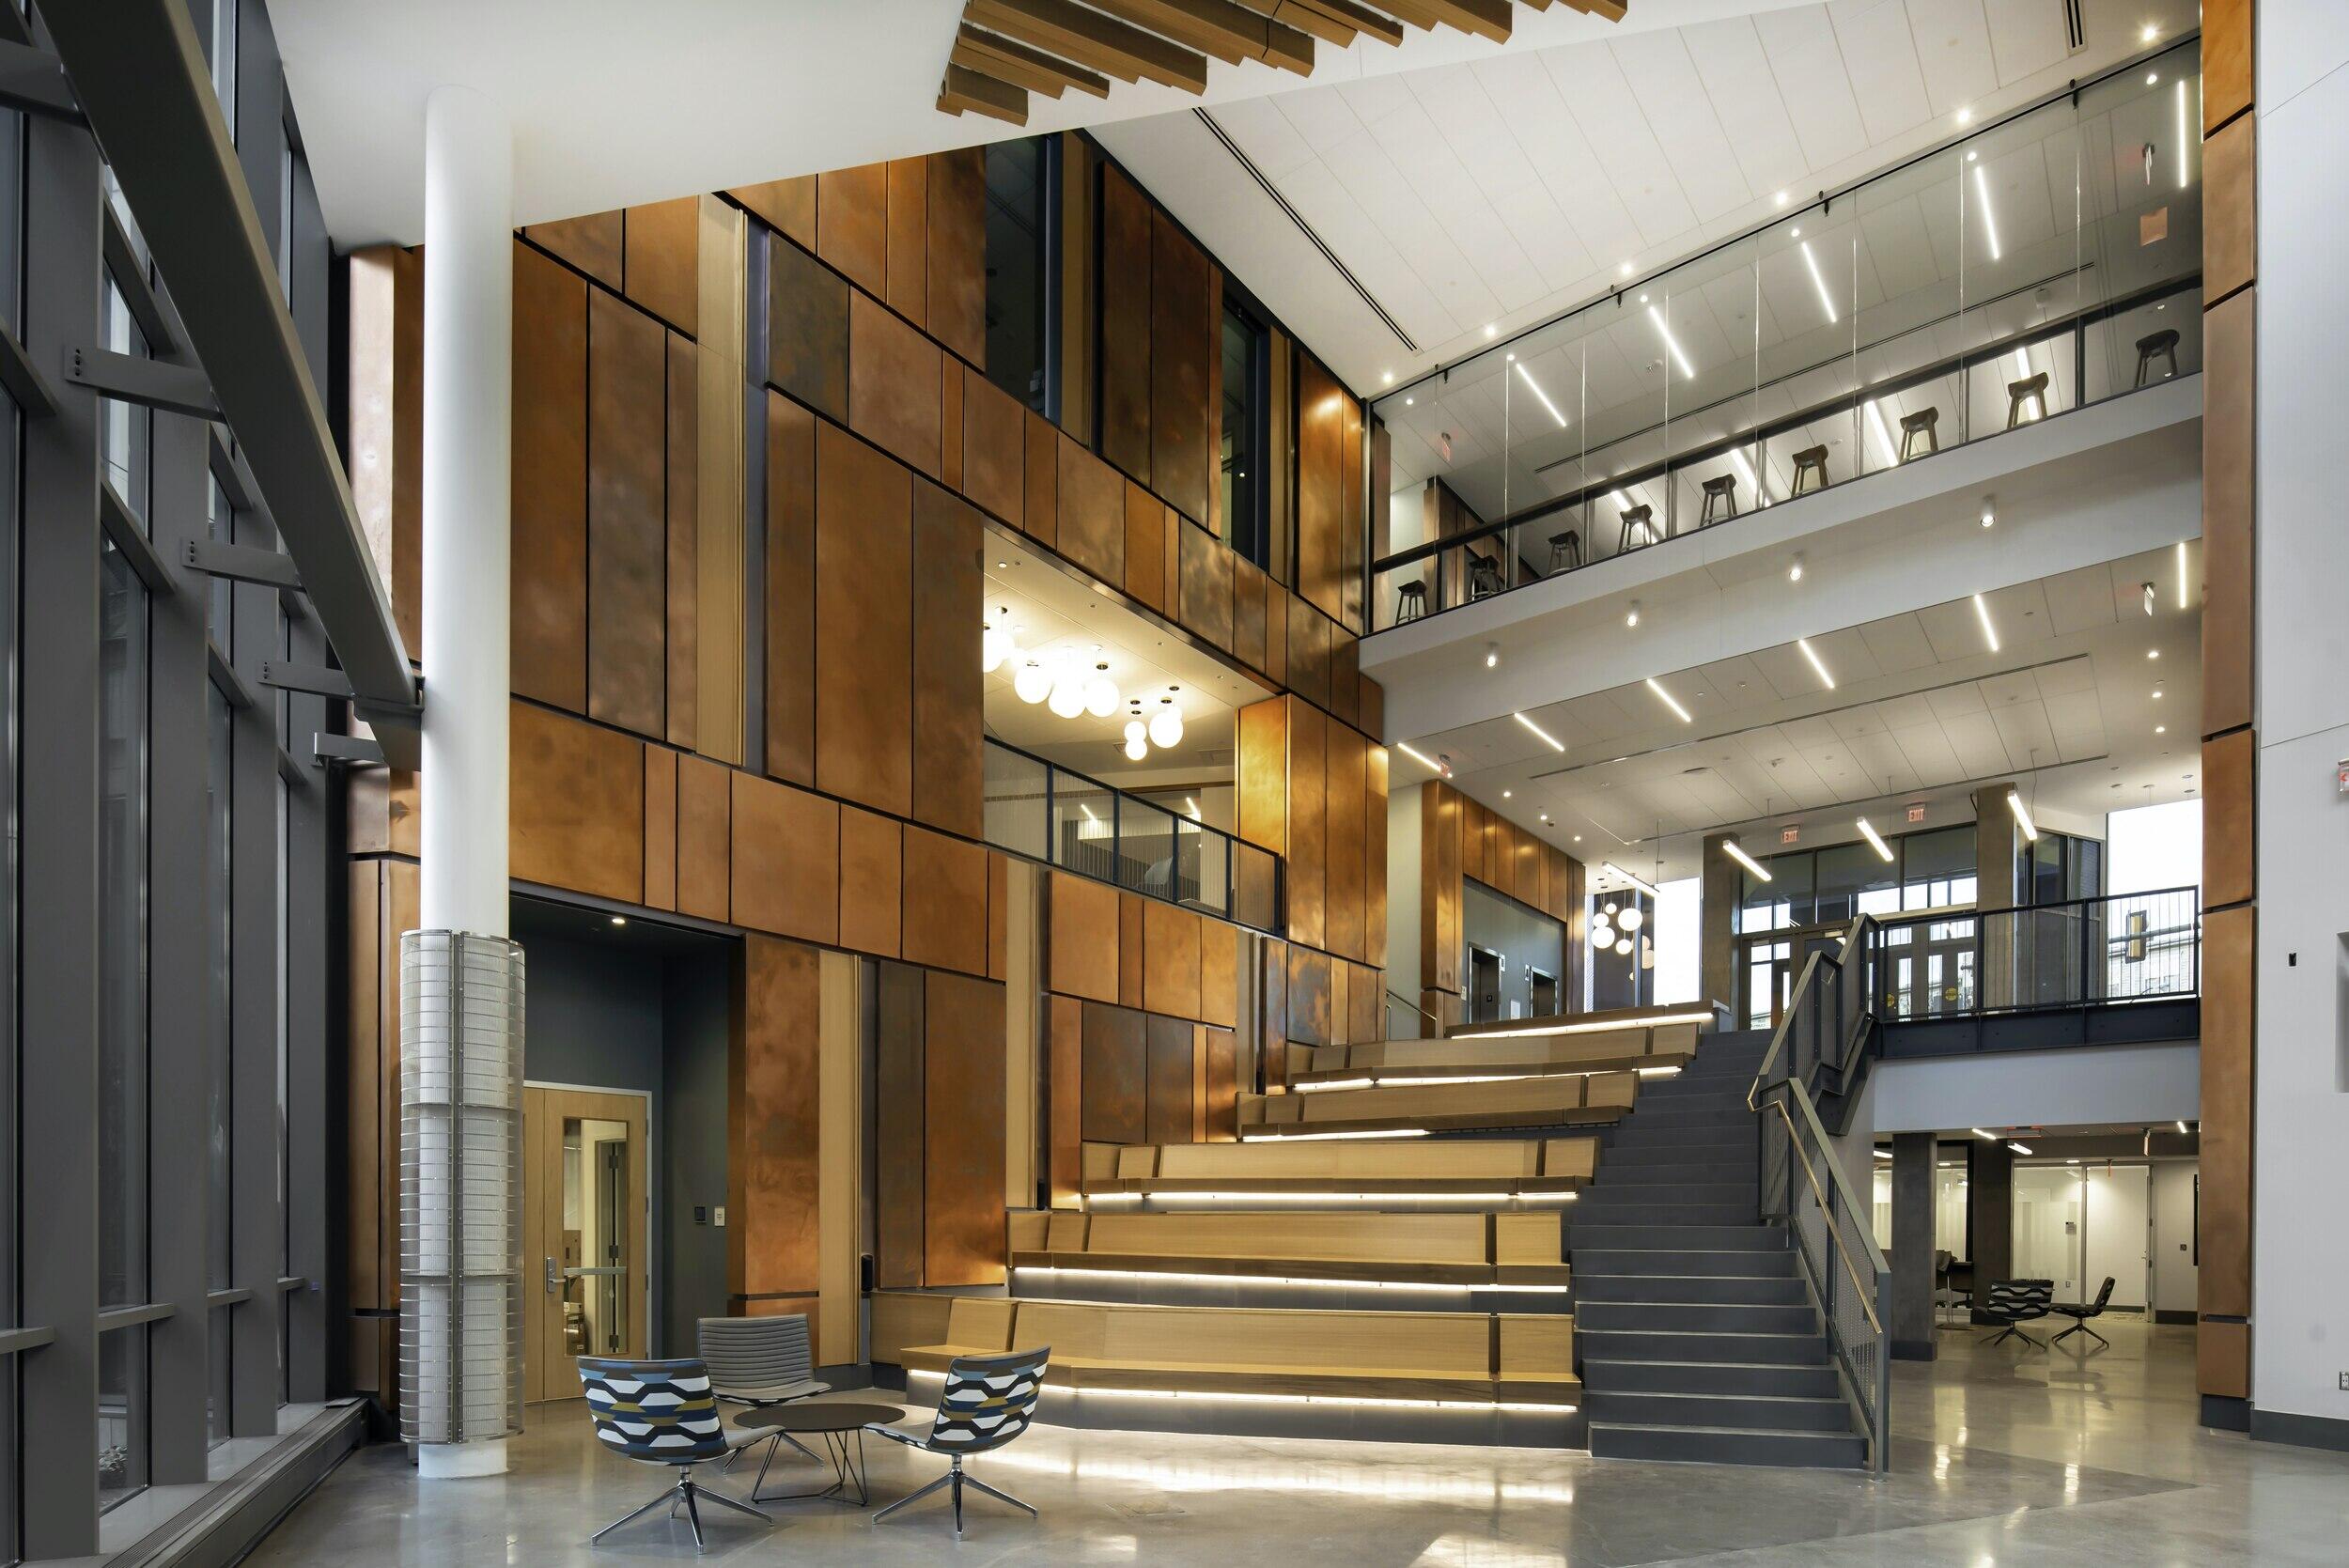 Staircase leading to the Collaboration Hub.